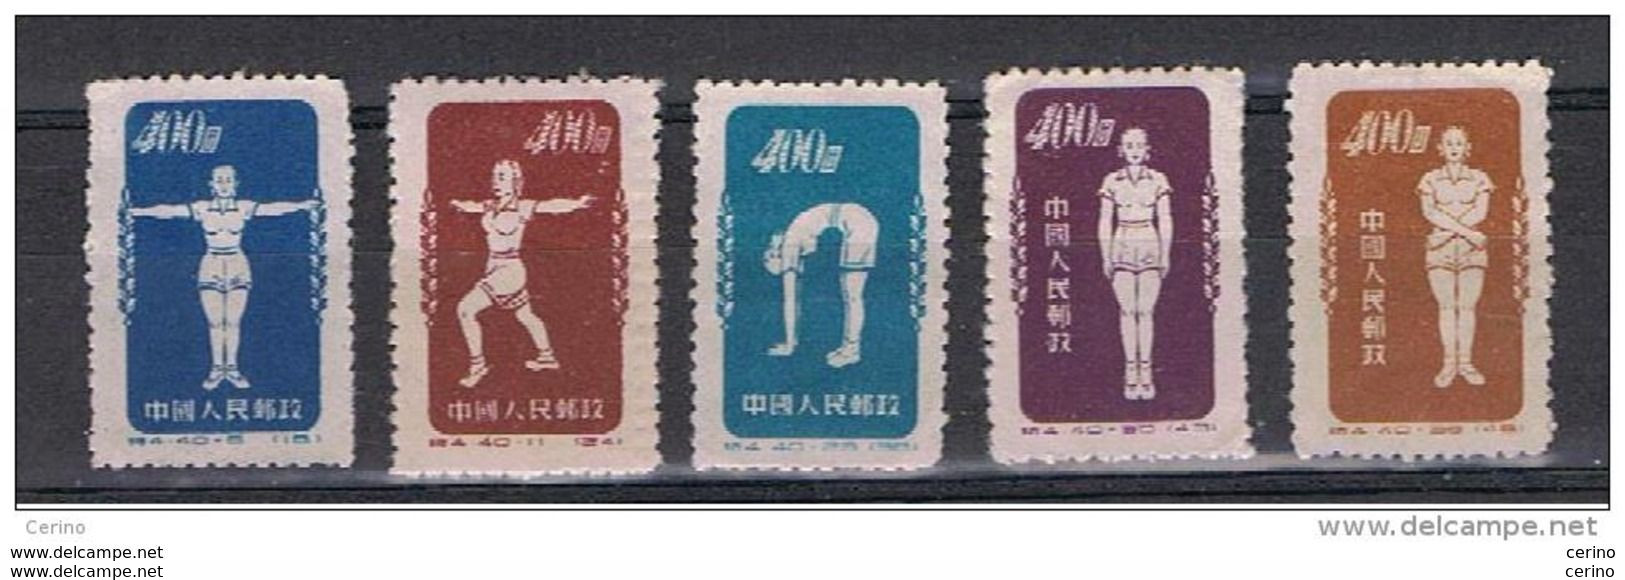 CHINA:  1952  PHISIC  CULTURE  -  LOT  5  UNUSED  STAMPS  -  YV/TELL. 934//941 C - Réimpressions Officielles